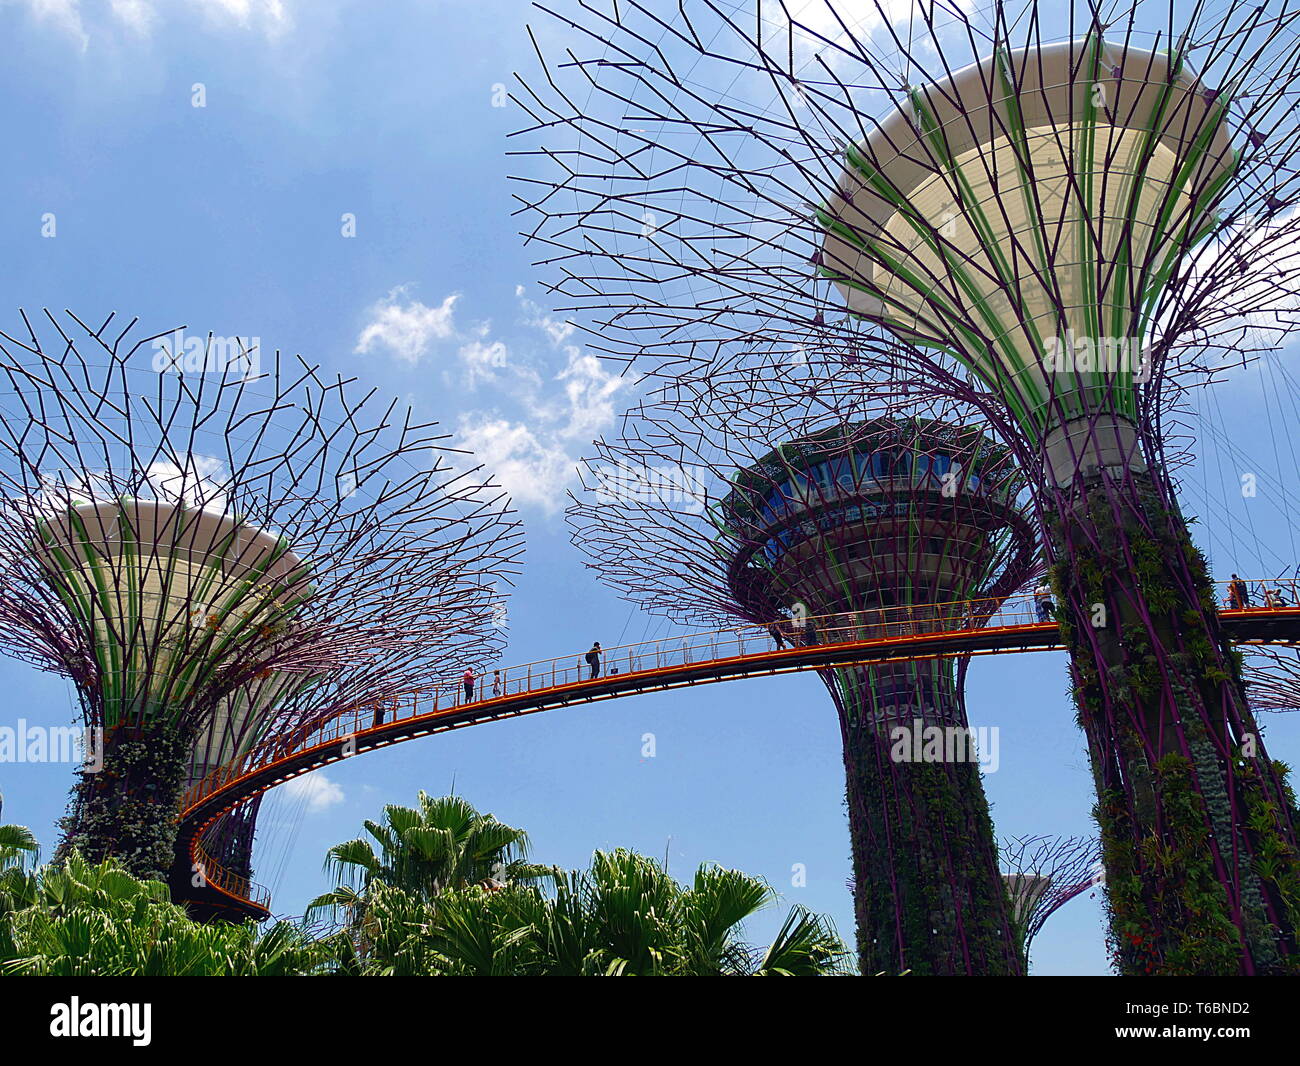 In Singapore S Famous Gardens By The Bay Botanical Park The